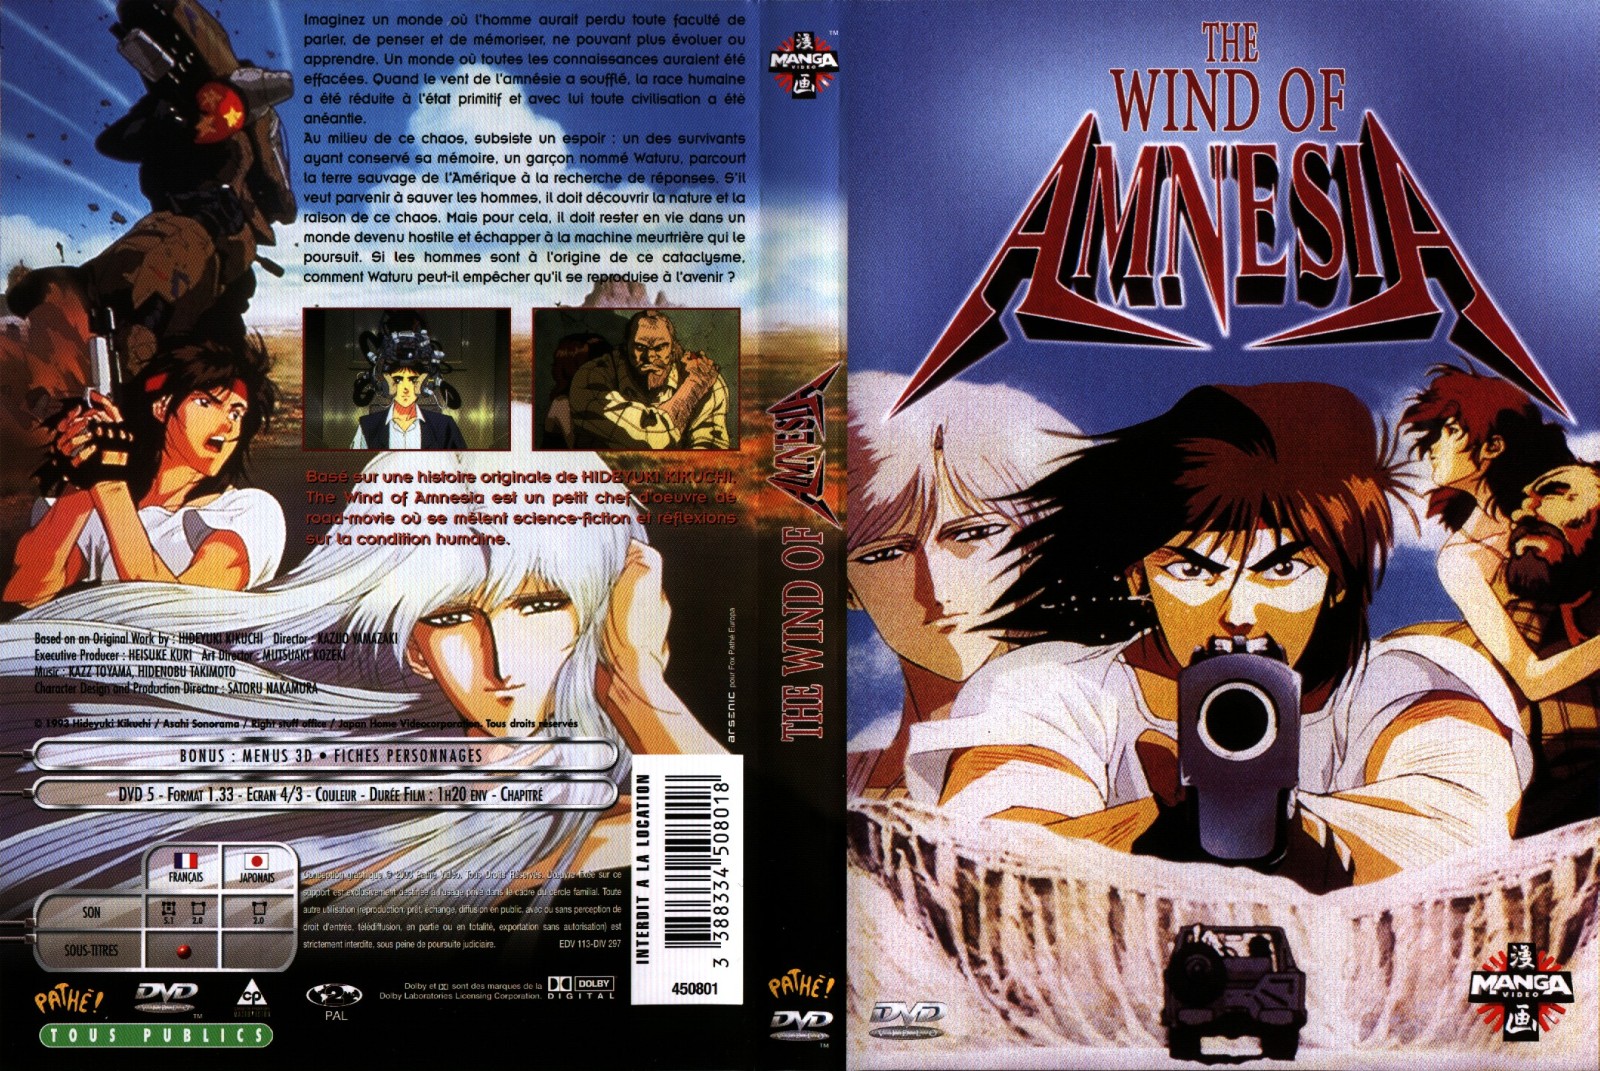 Jaquette DVD The wind of amnesia